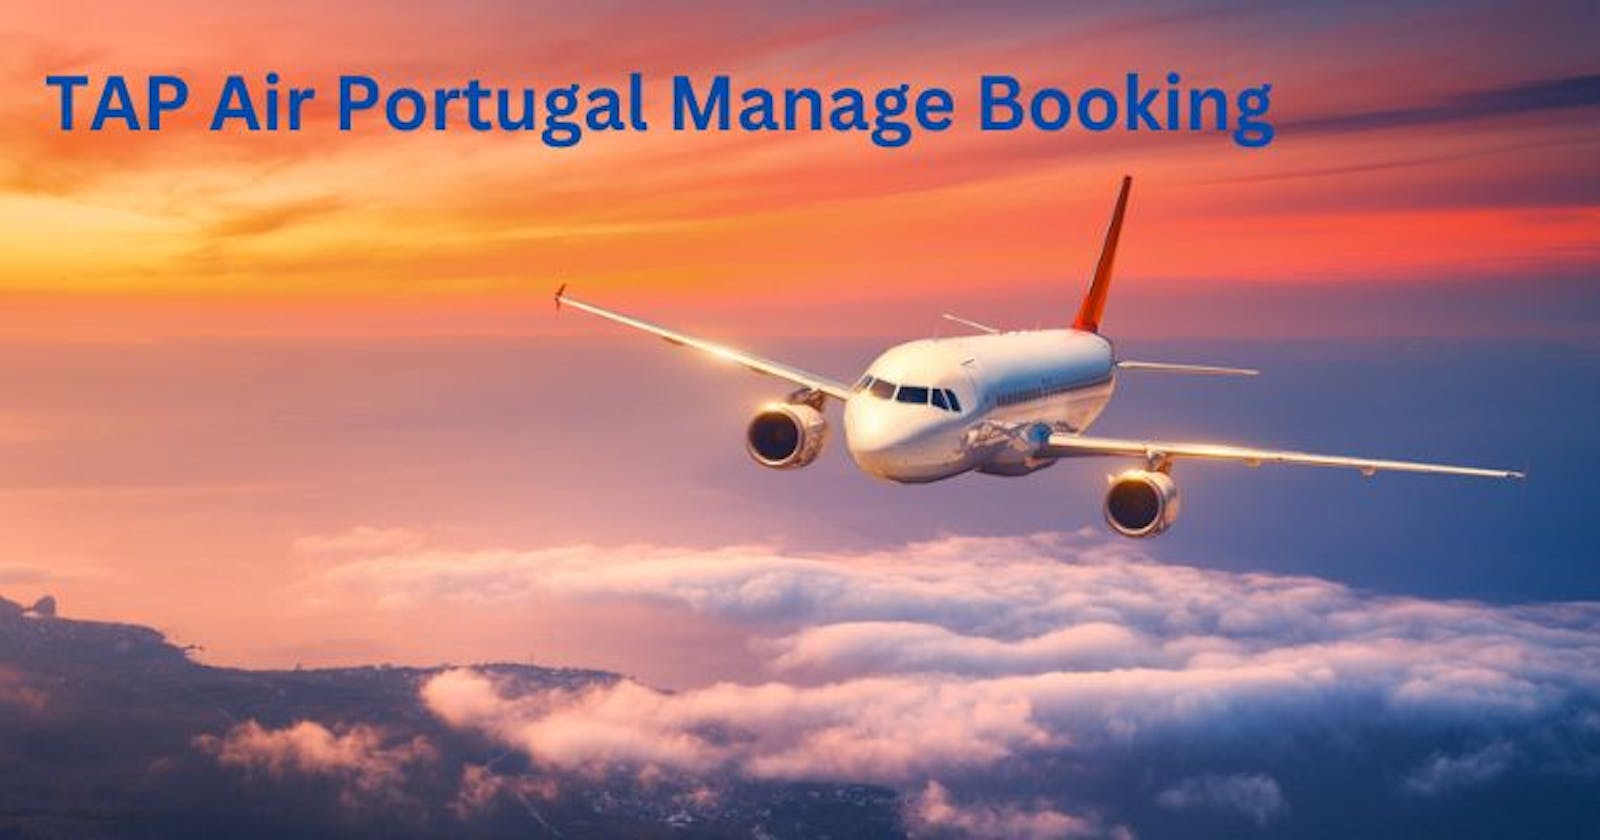 How to Manage Your TAP Air Portugal Booking?